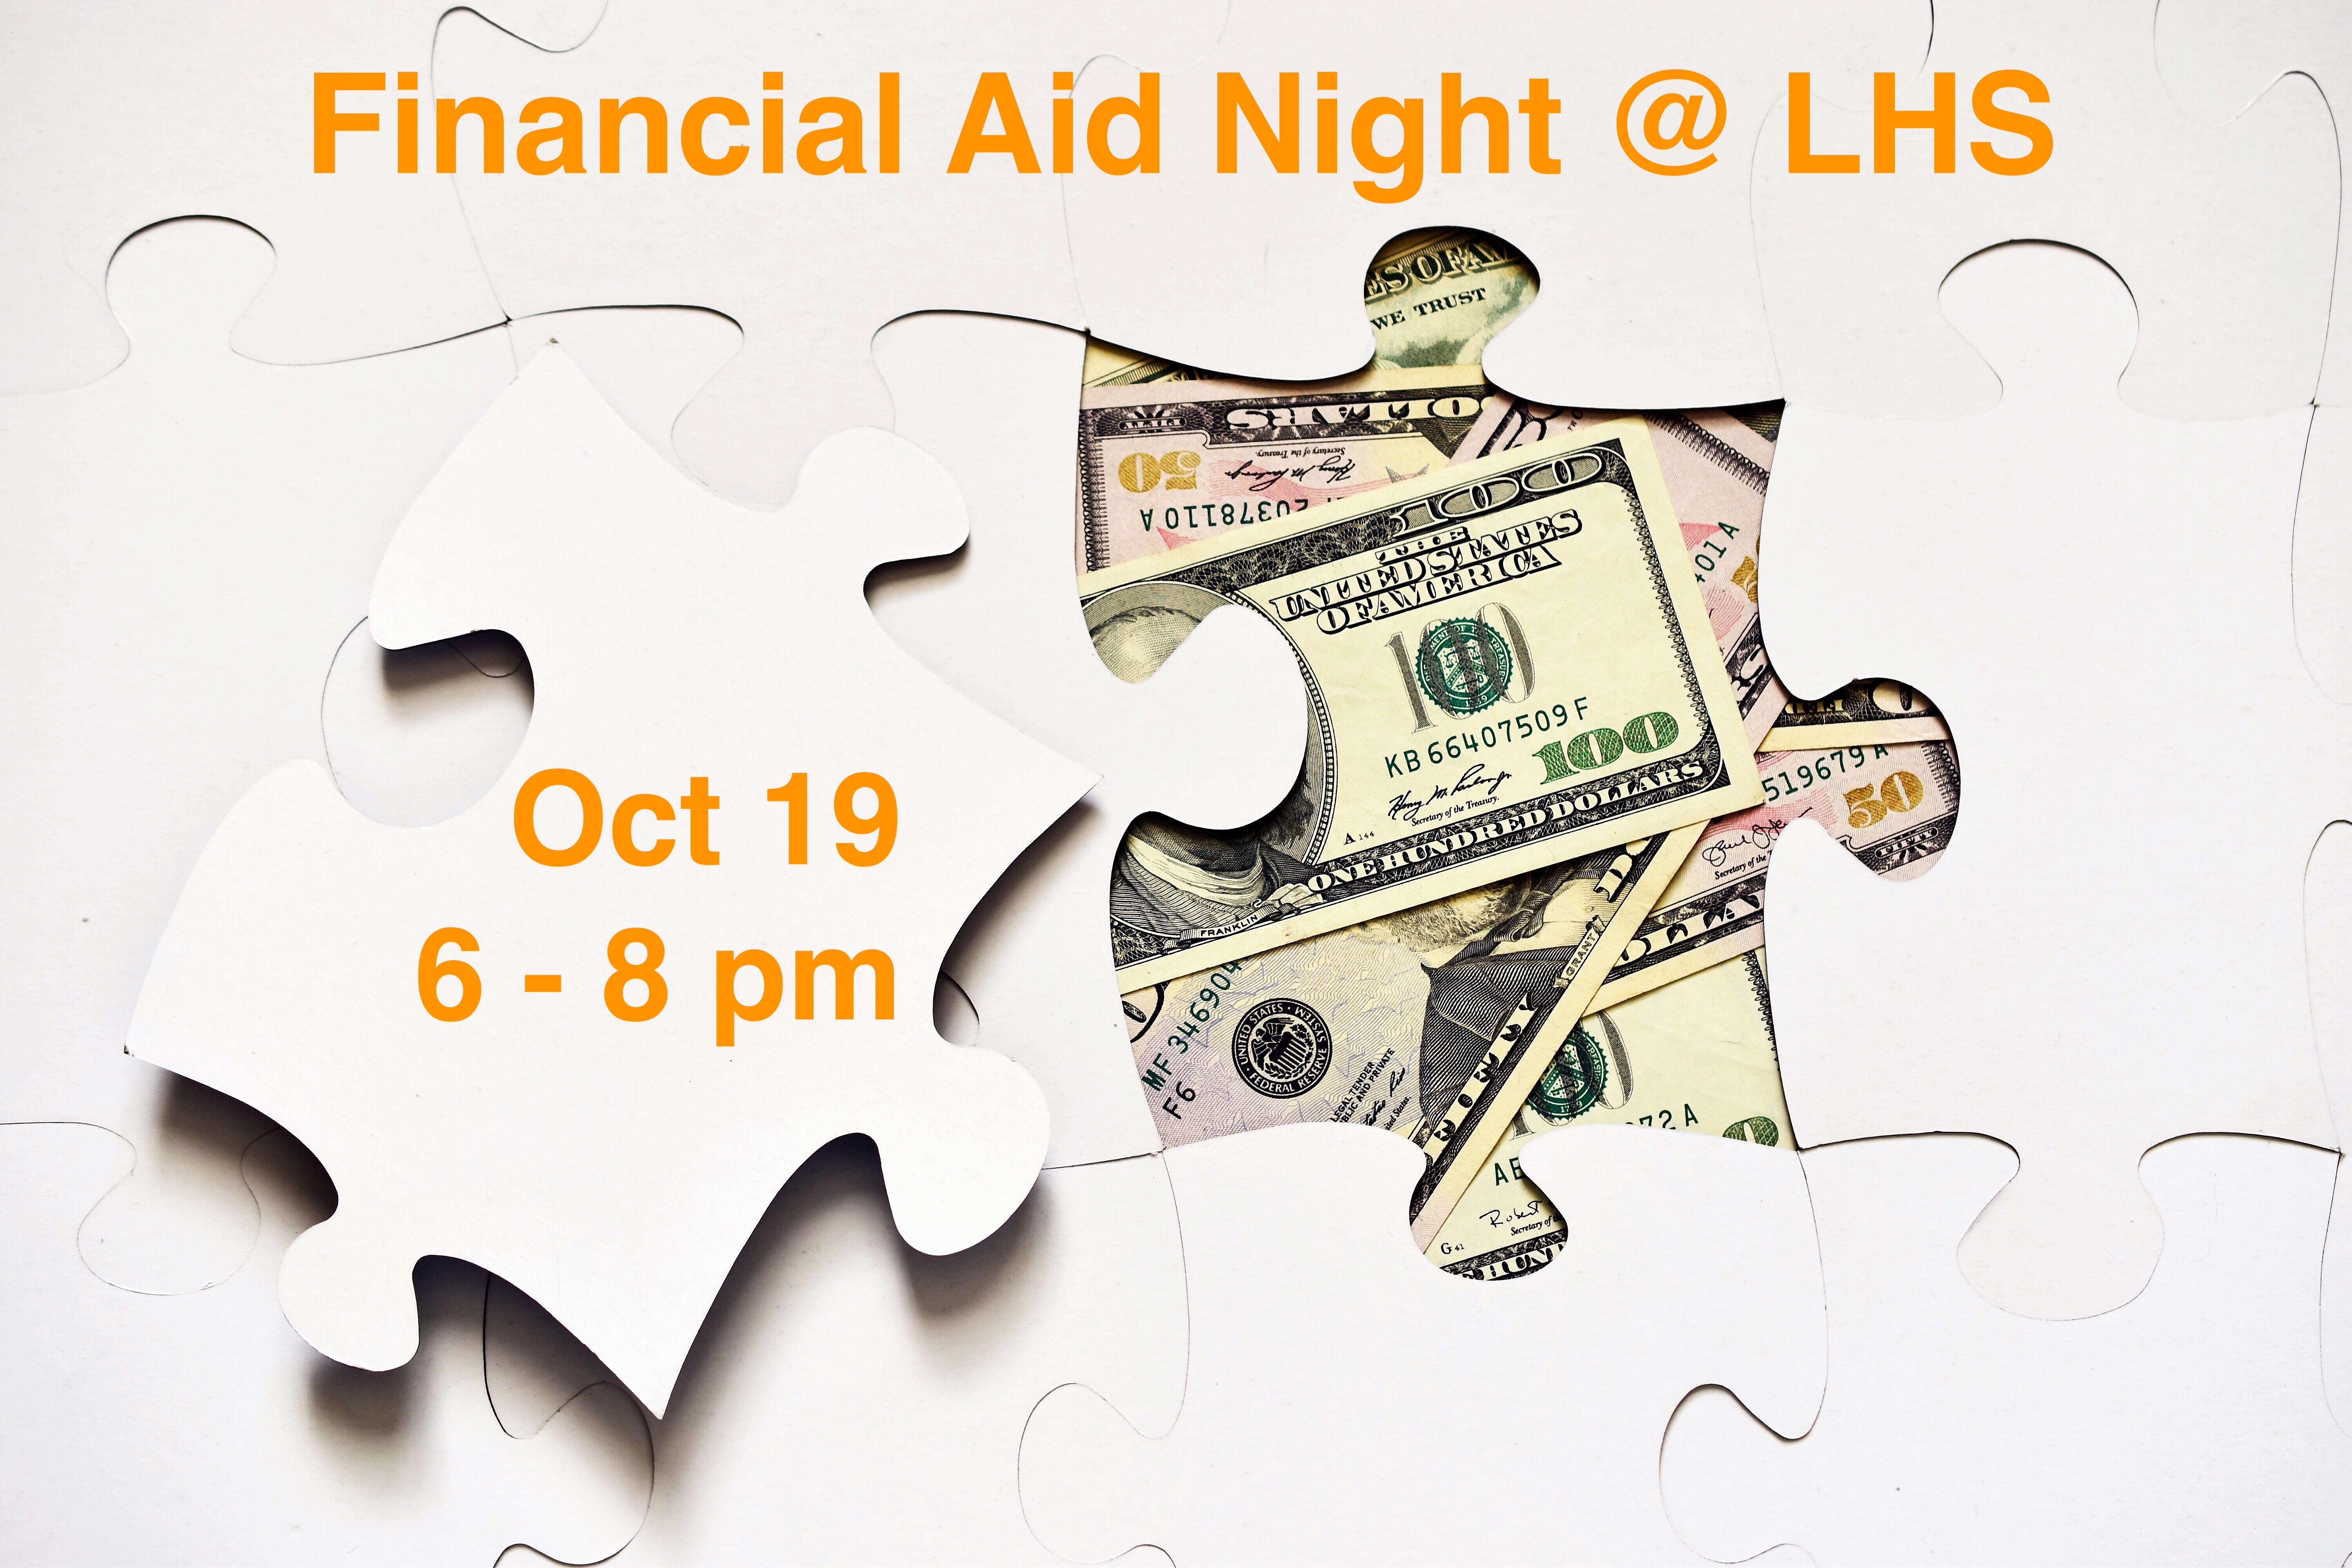 Financial Aid Night October 19 from 6 to 8 pm